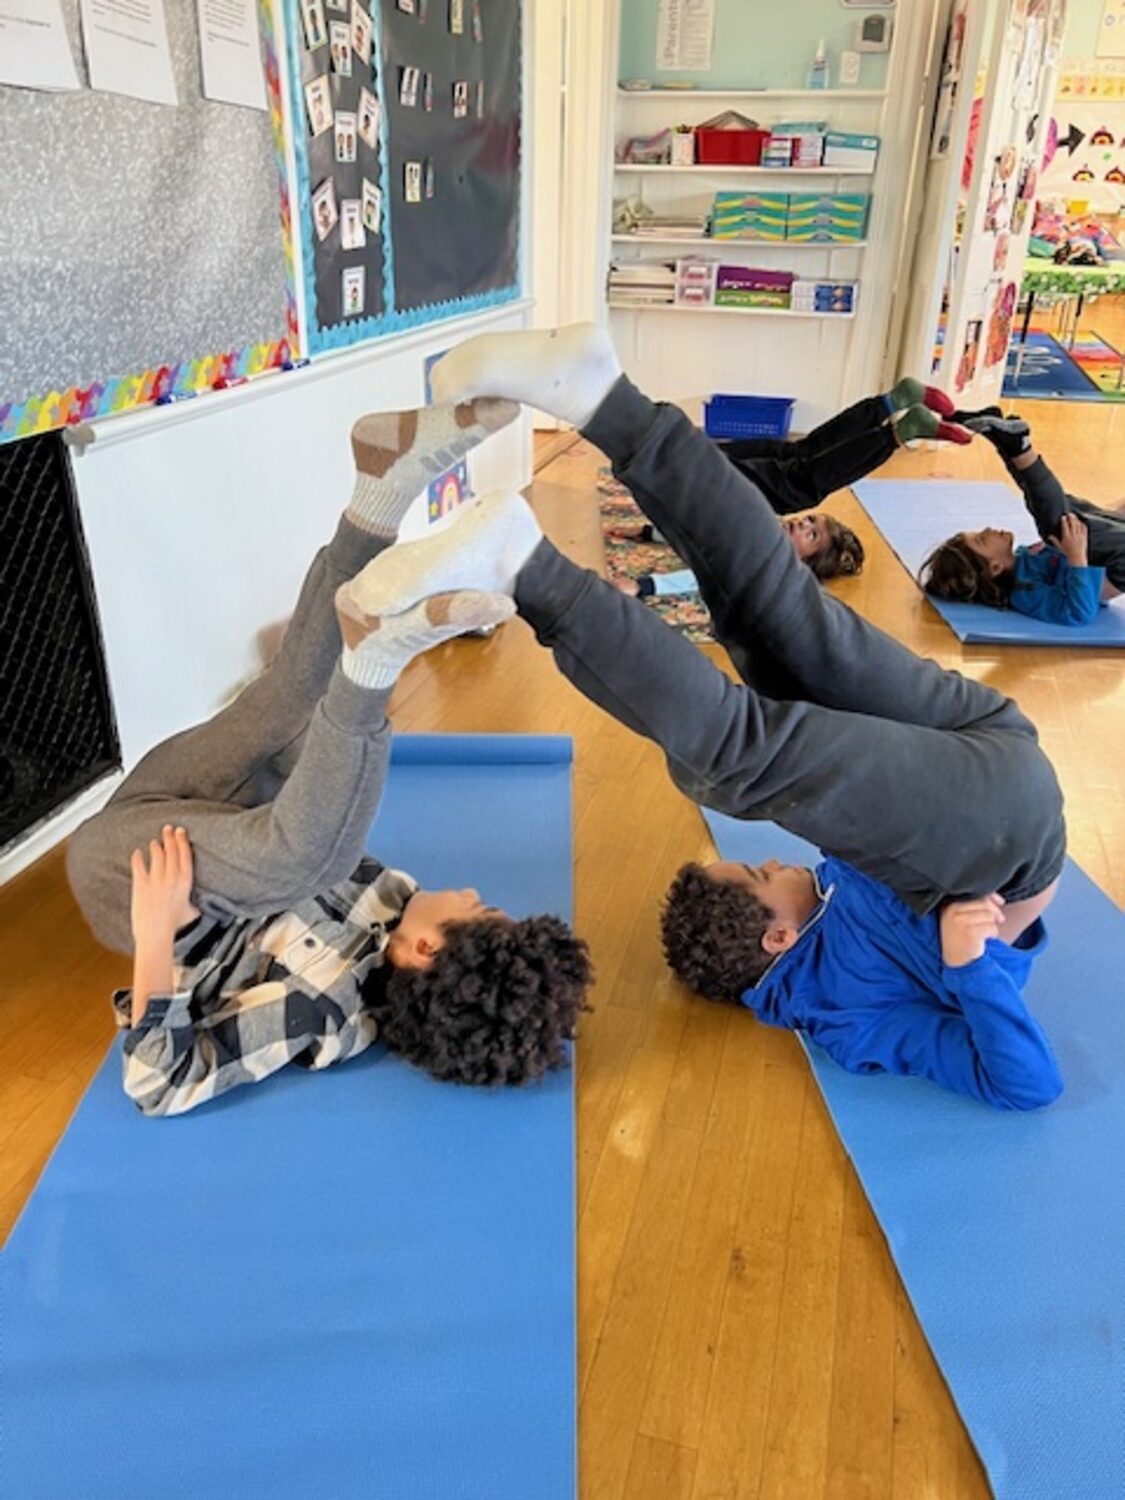 Yoga is the focus right now in physical education at the Sagaponack School. Kristin Davey of Peaceful Planet Yoga leads the students in poses. COURTESY SAGAPONACK SCHOOL